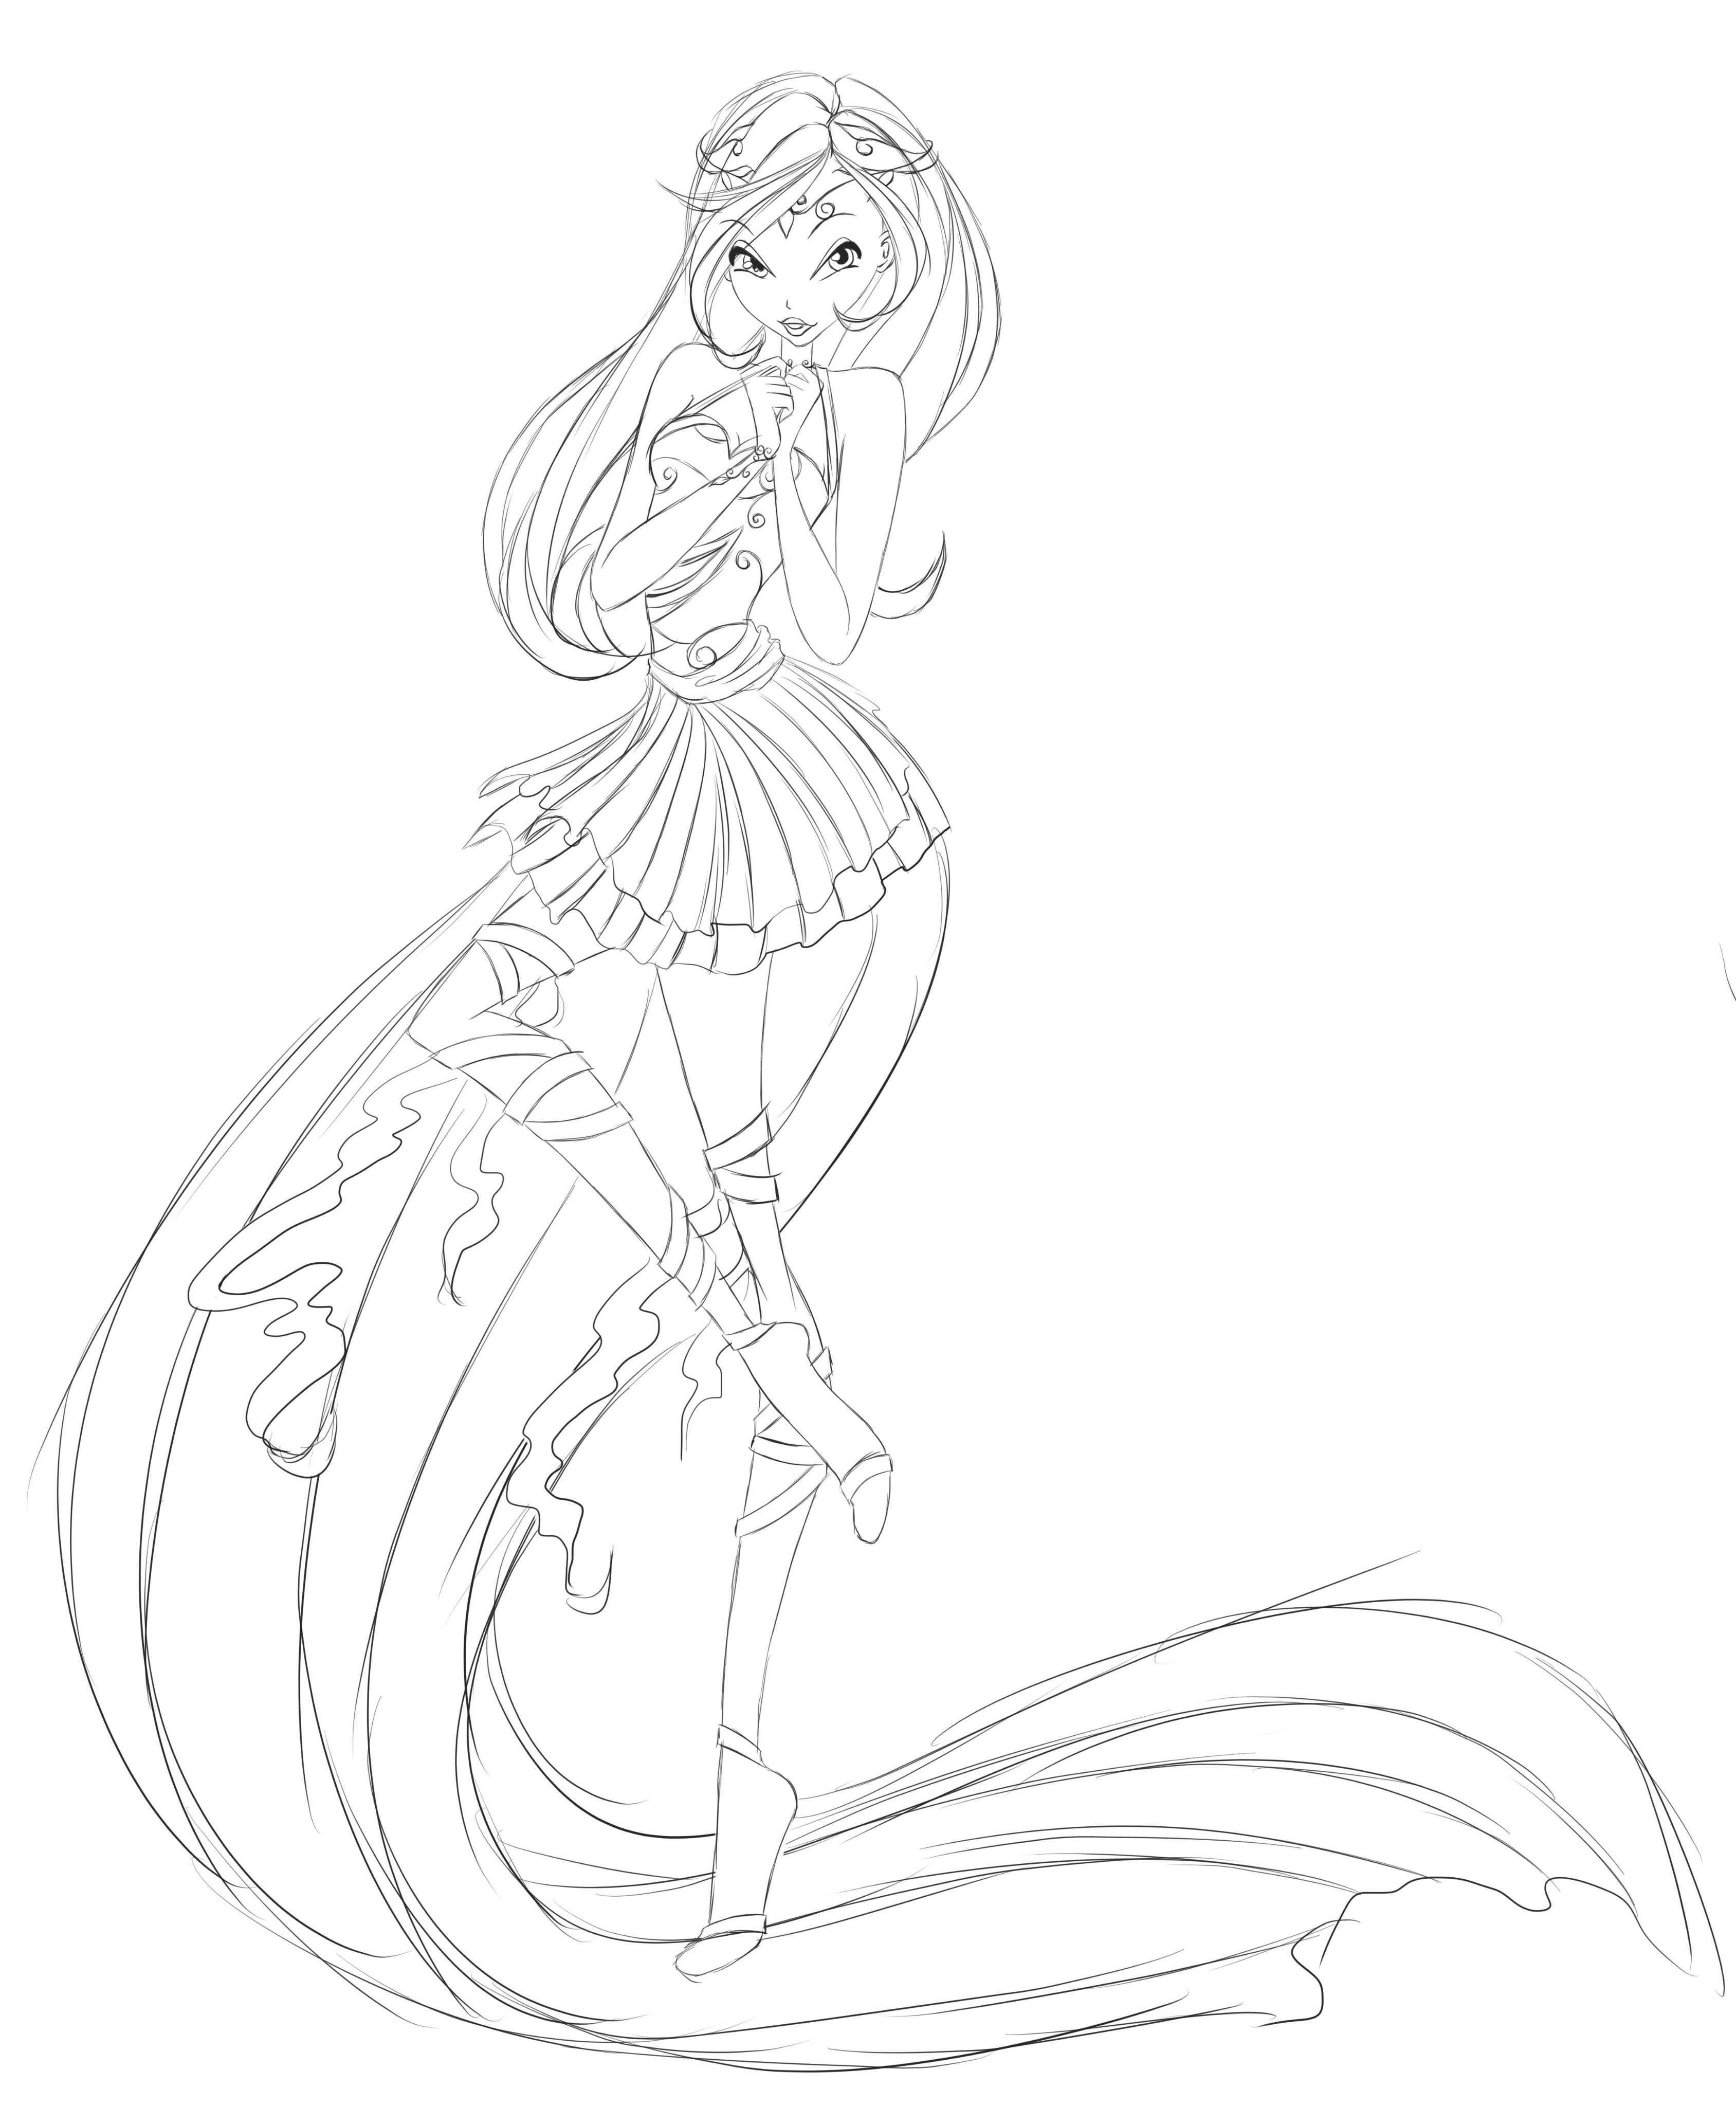 winx club musa sirenix coloring pages